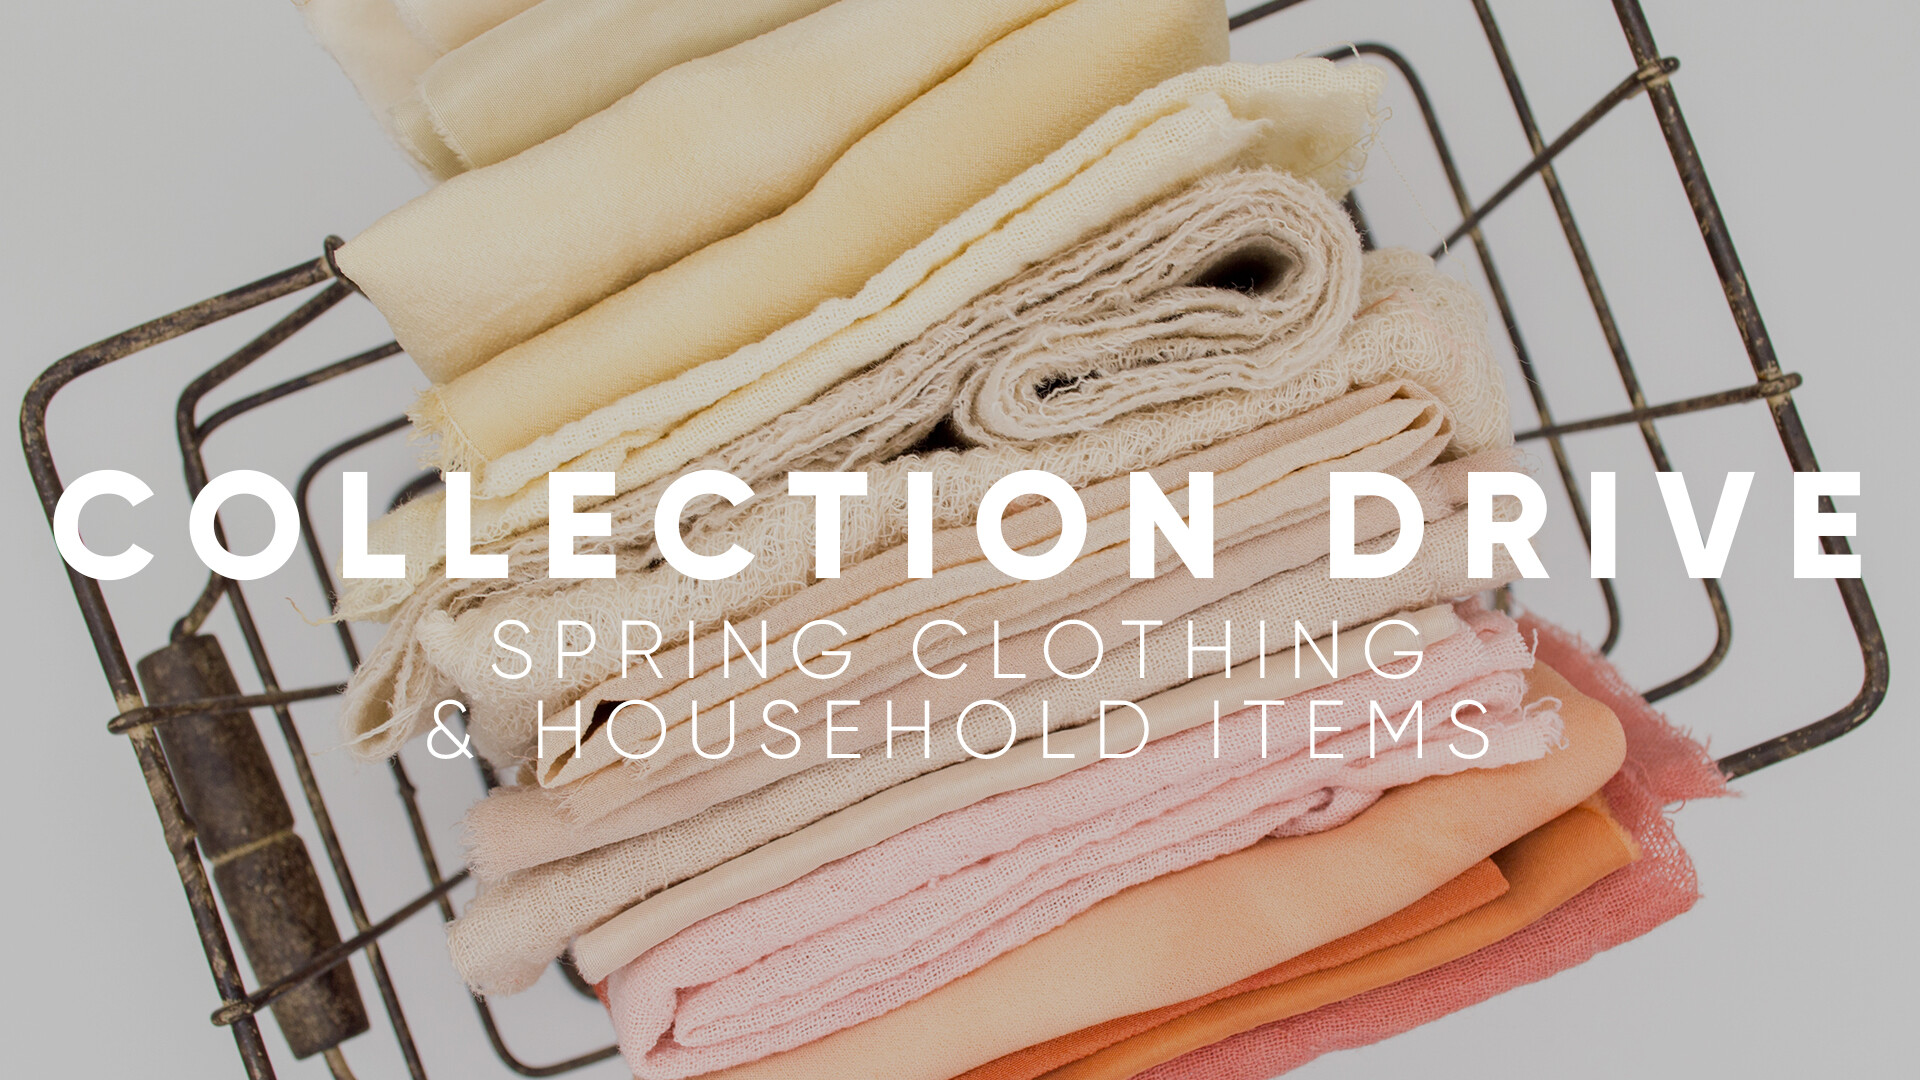 Spring Clothing & Household Items Collection Drive